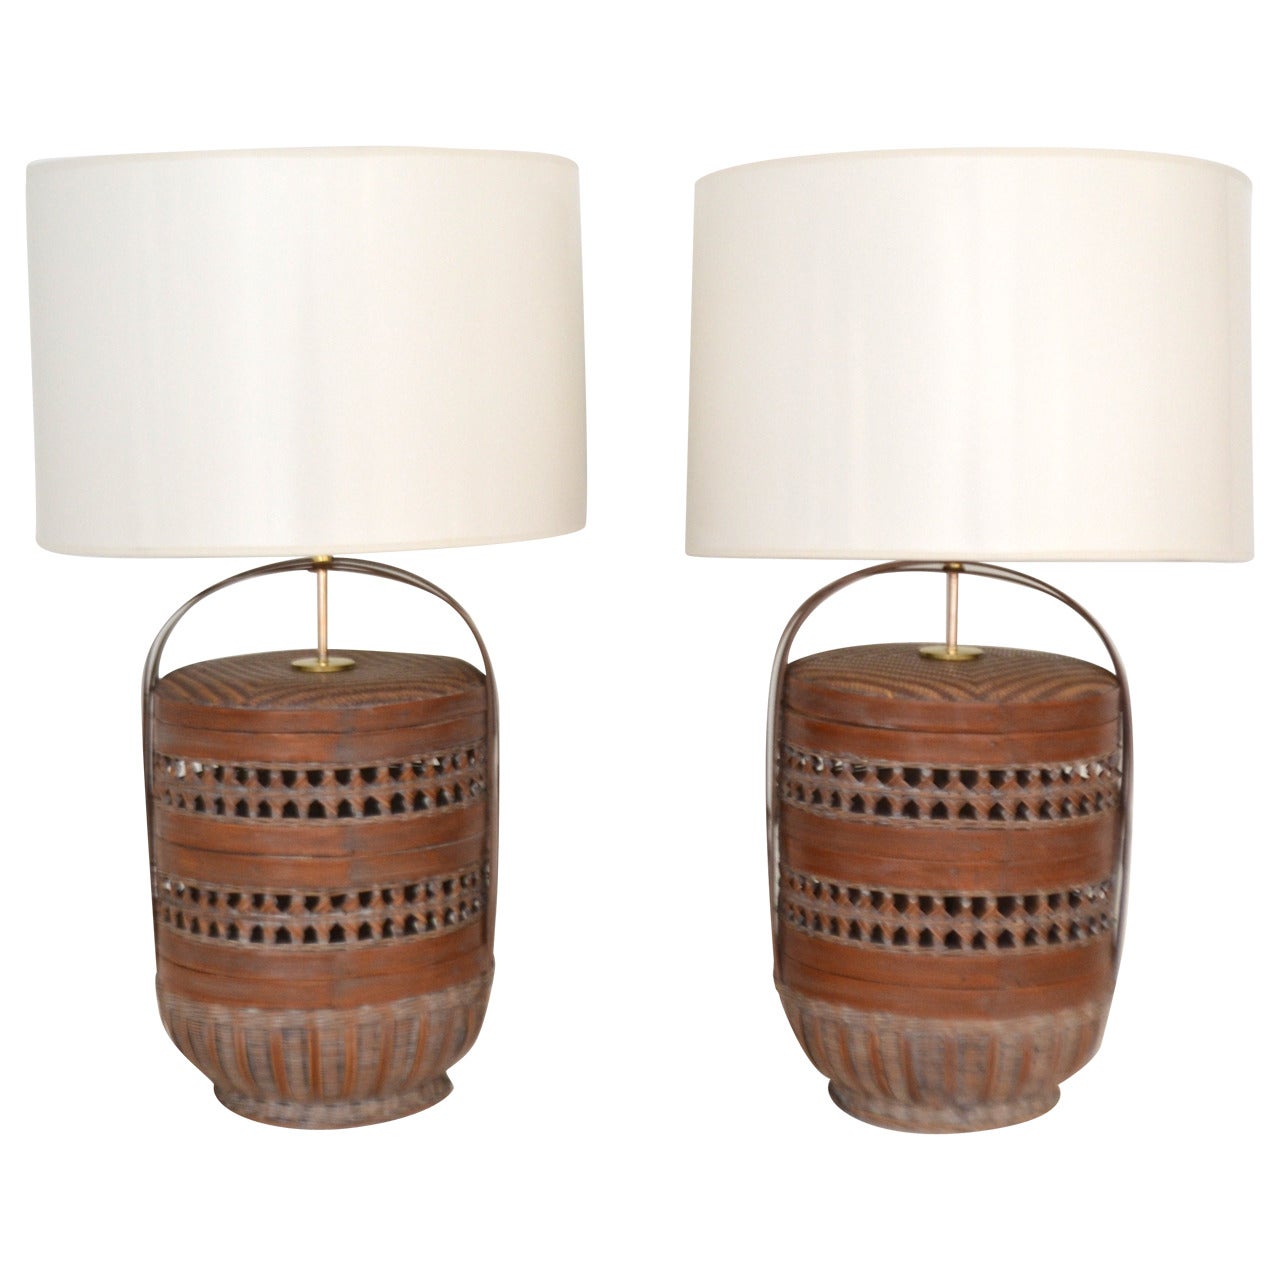 Pair of Woven Reed Basket Lamps